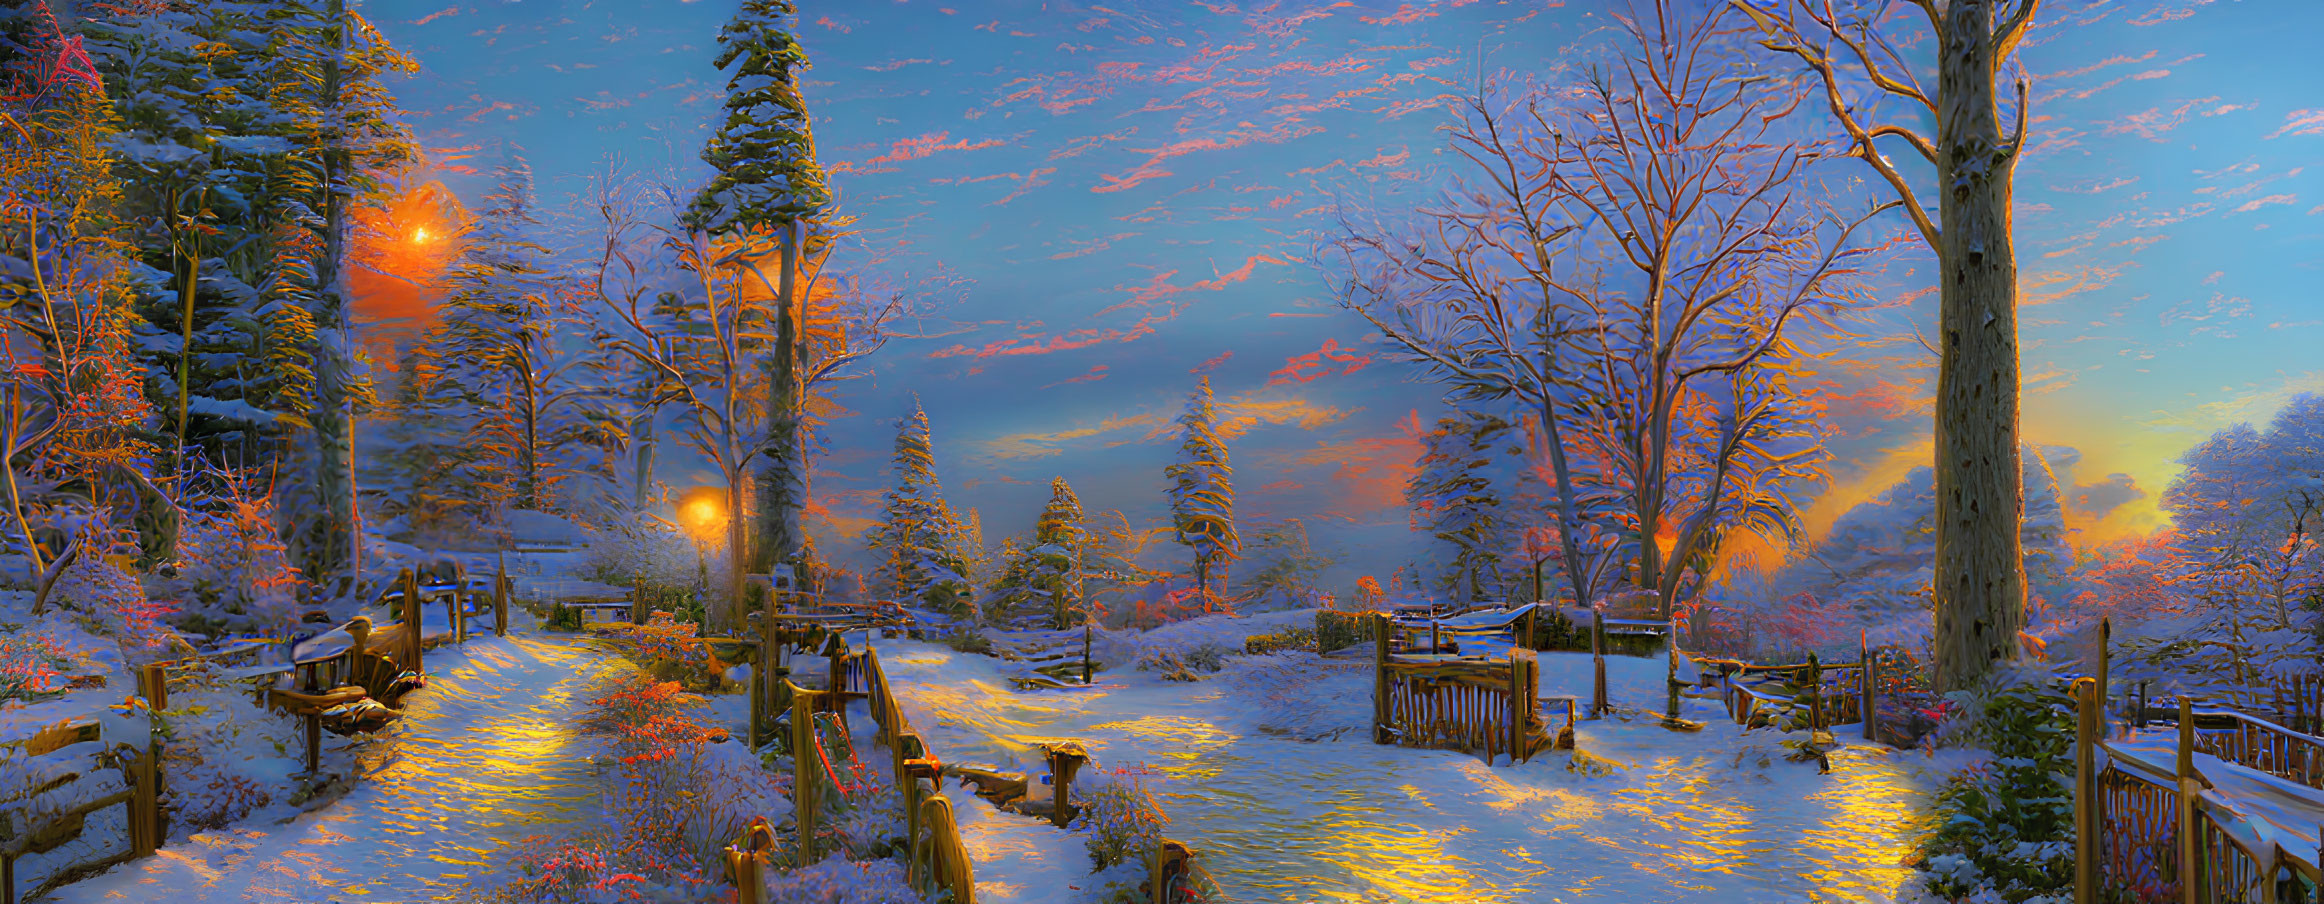 Snowy Dusk Landscape with Illuminated Lamps and Trees